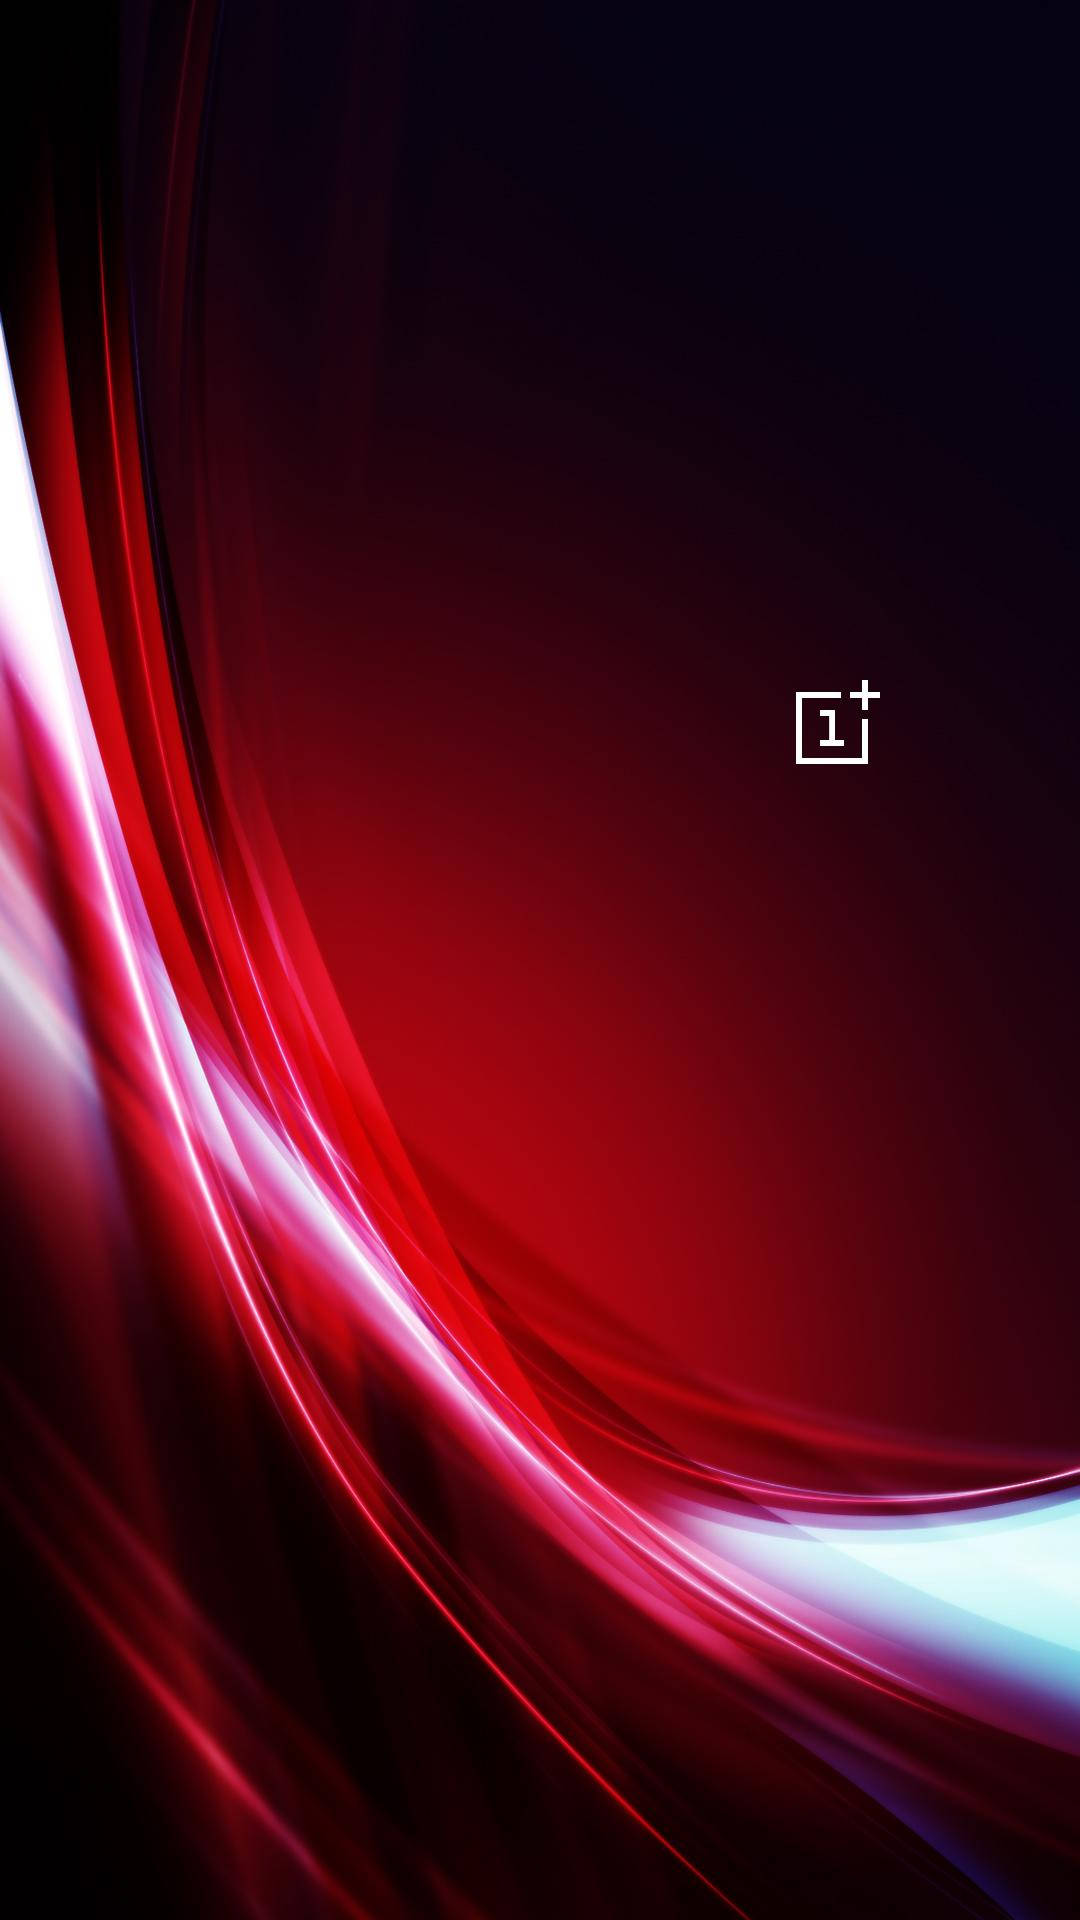 Exquisite Oneplus Red Gradient. Oneplus Gradient In Its Authentic Scarlet Red. Background